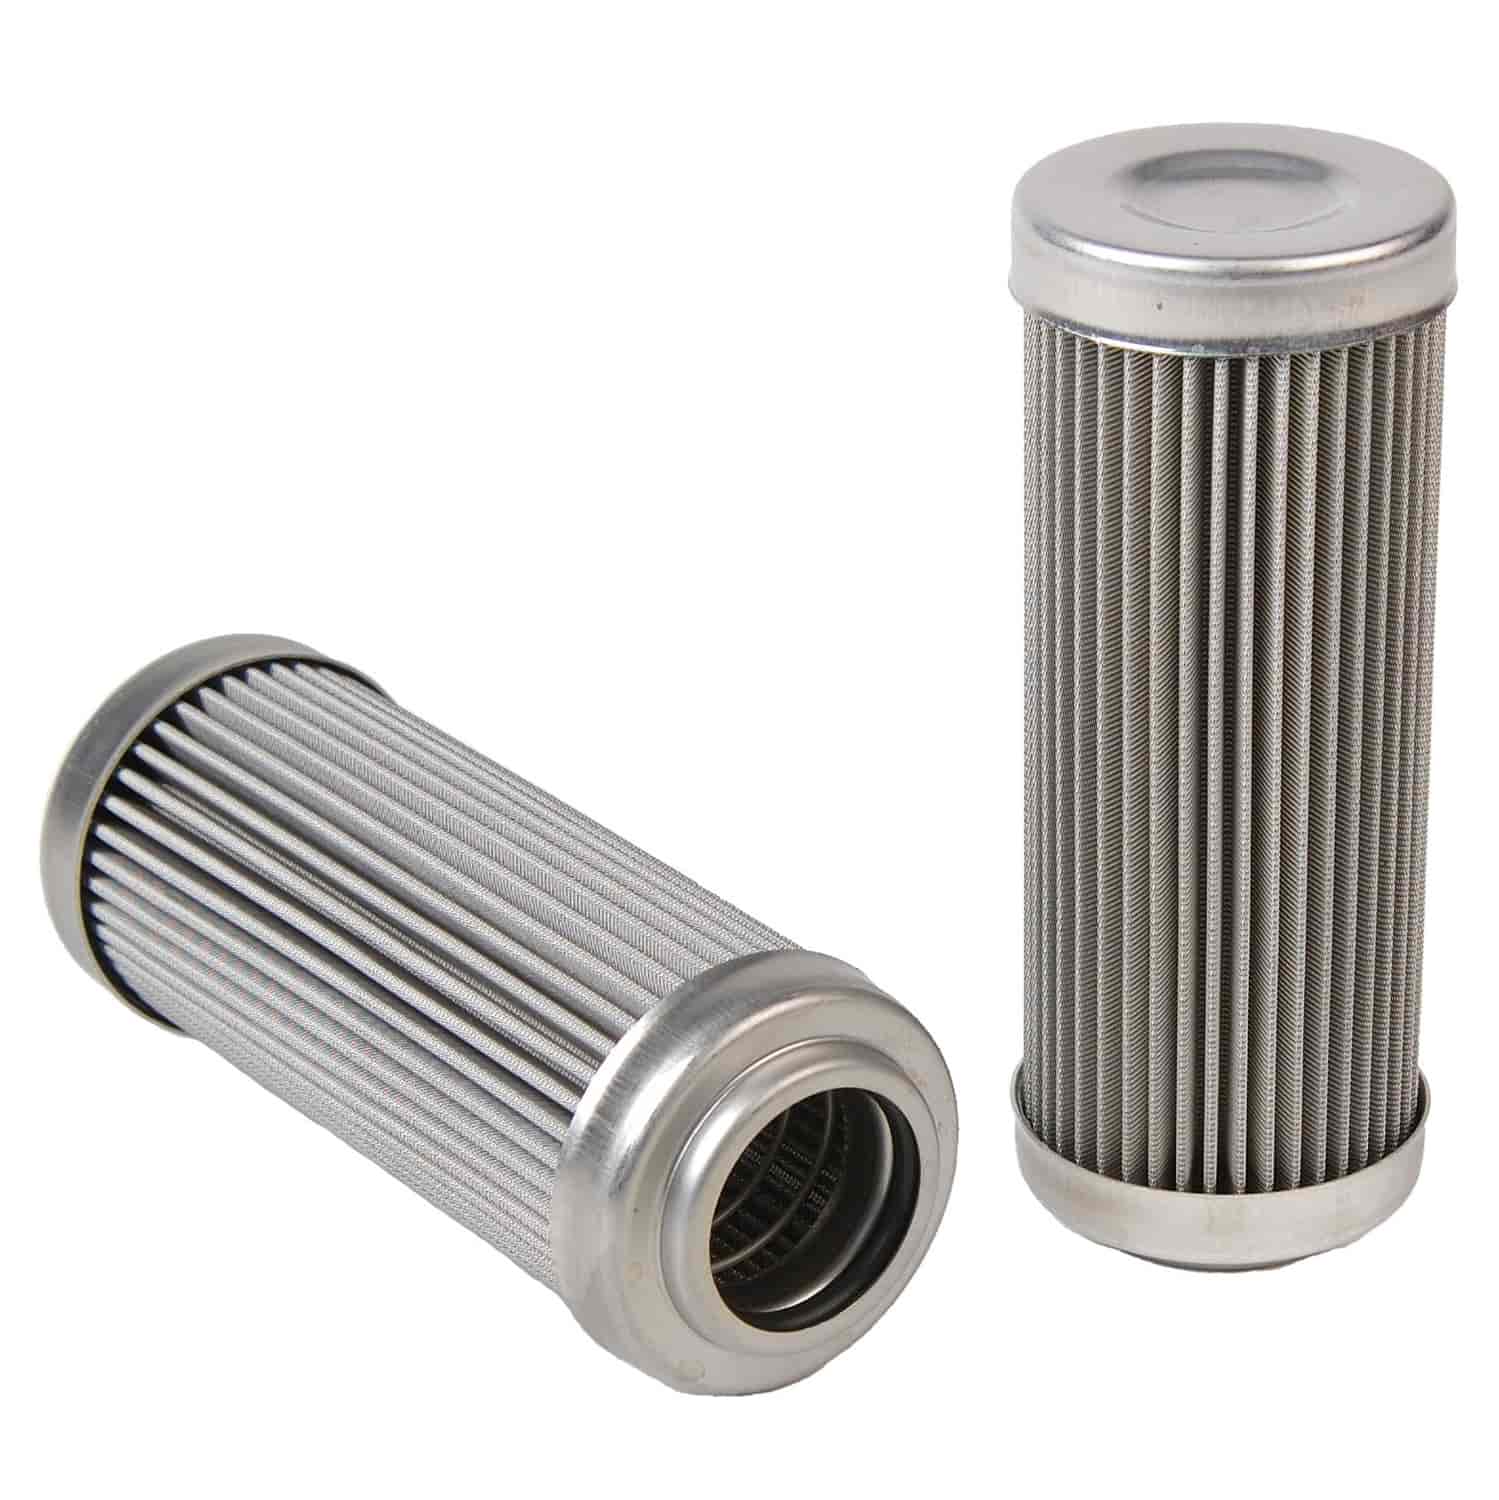 Replacement Fuel Filter Element 100 micron for part